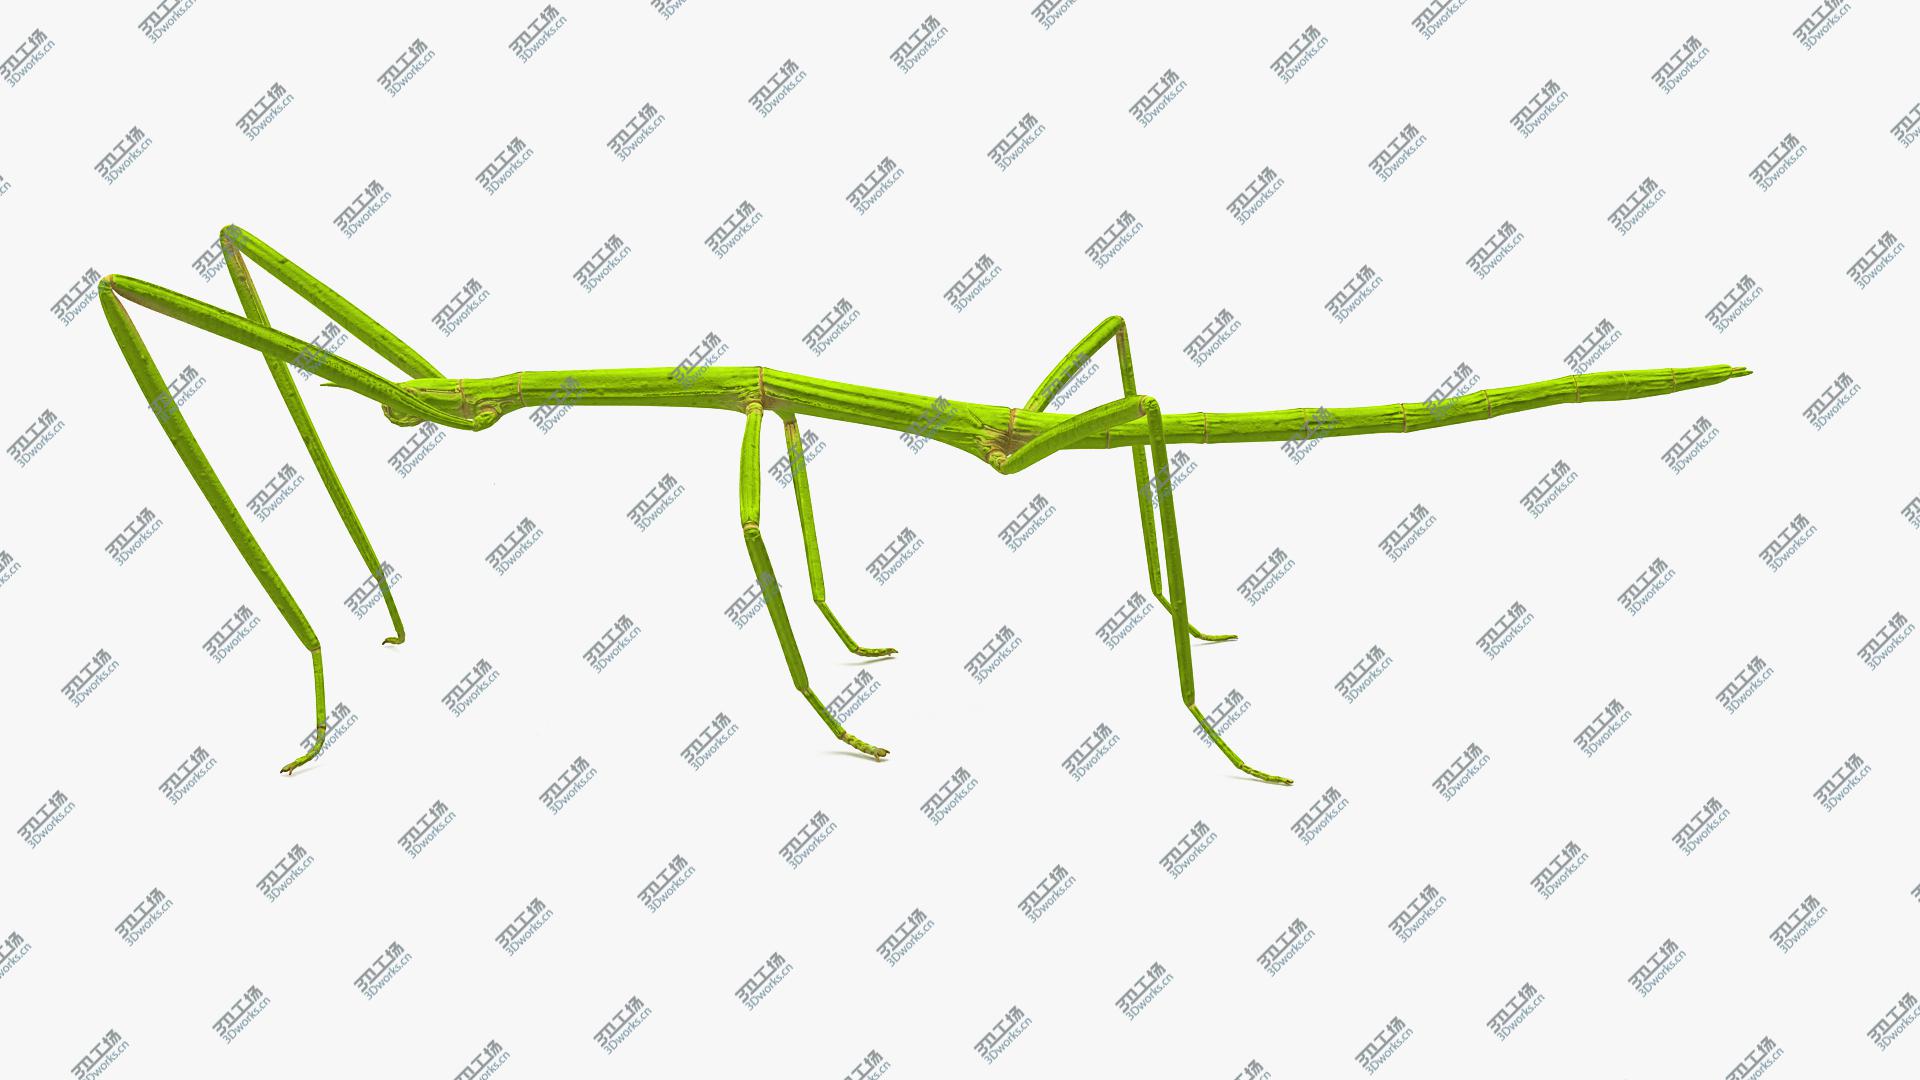 images/goods_img/202105071/Stick Insect Green Rigged 3D model/3.jpg